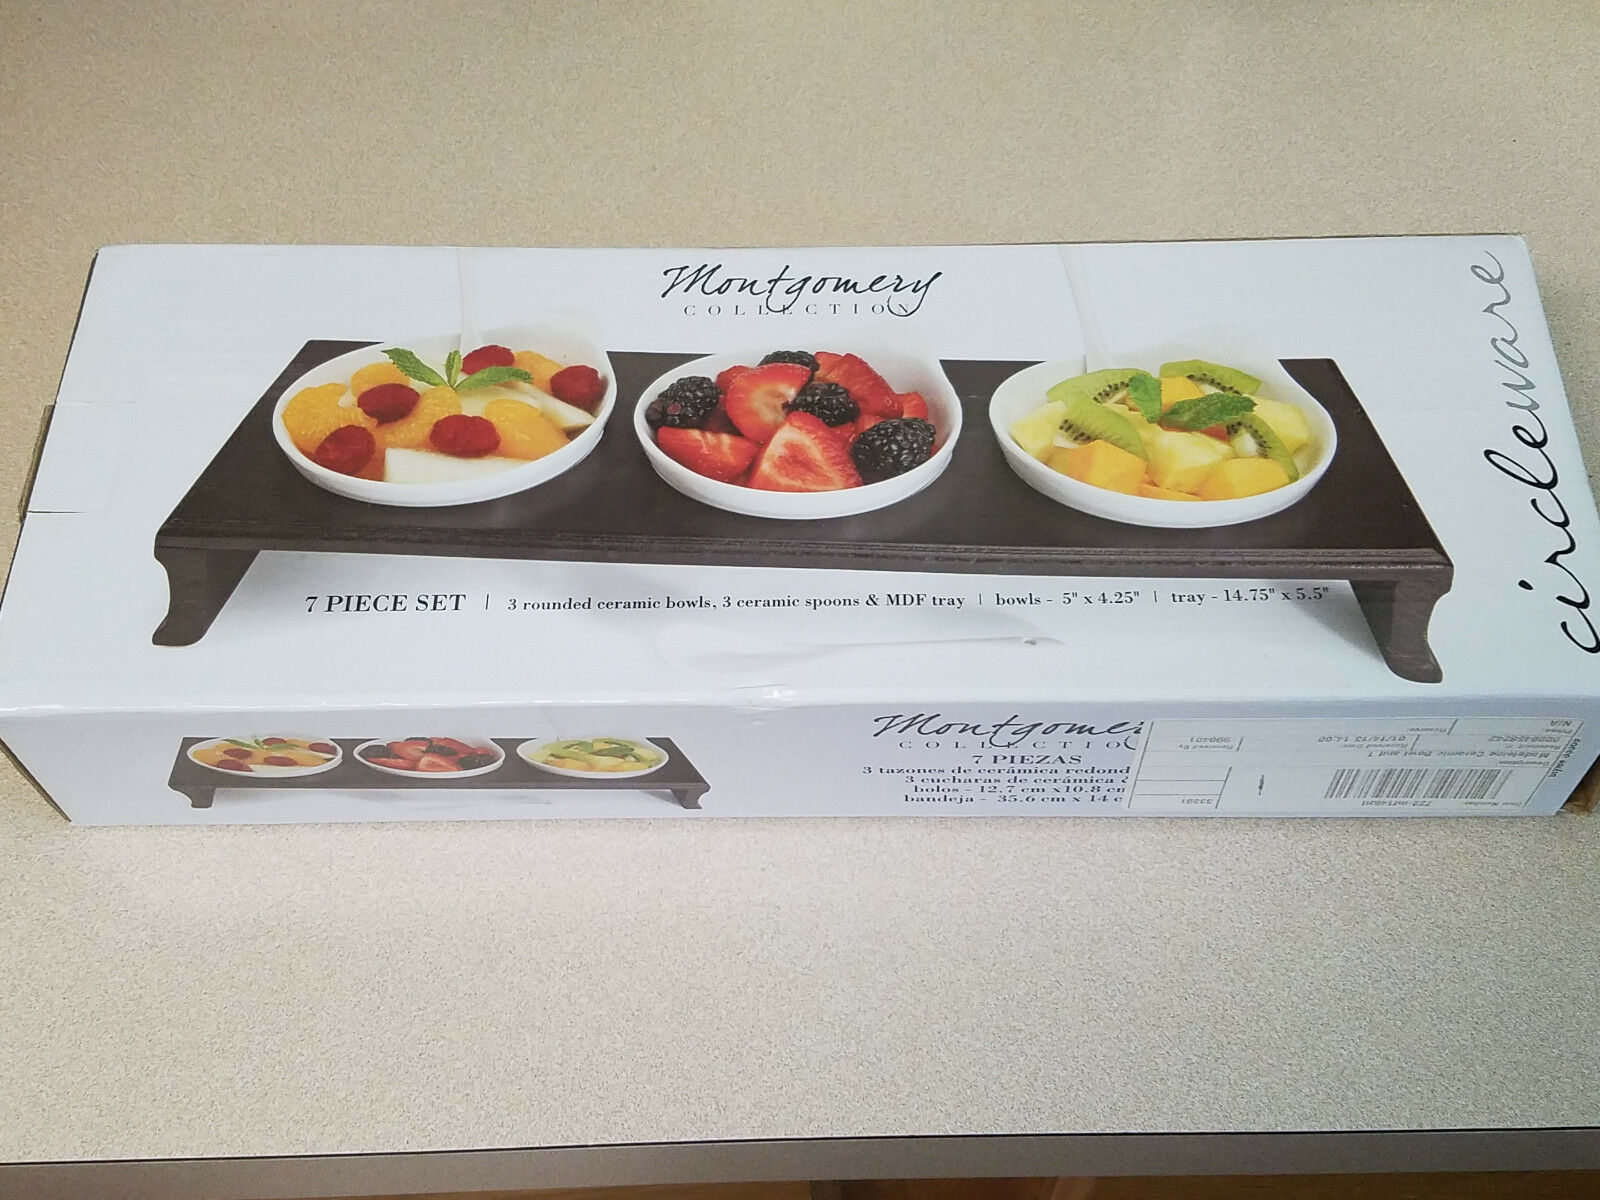 Montgomery Collection 7 Pc. Madeleine Ceramic Appetizer Dip Bowls w/Stand (NEW) - $19.75